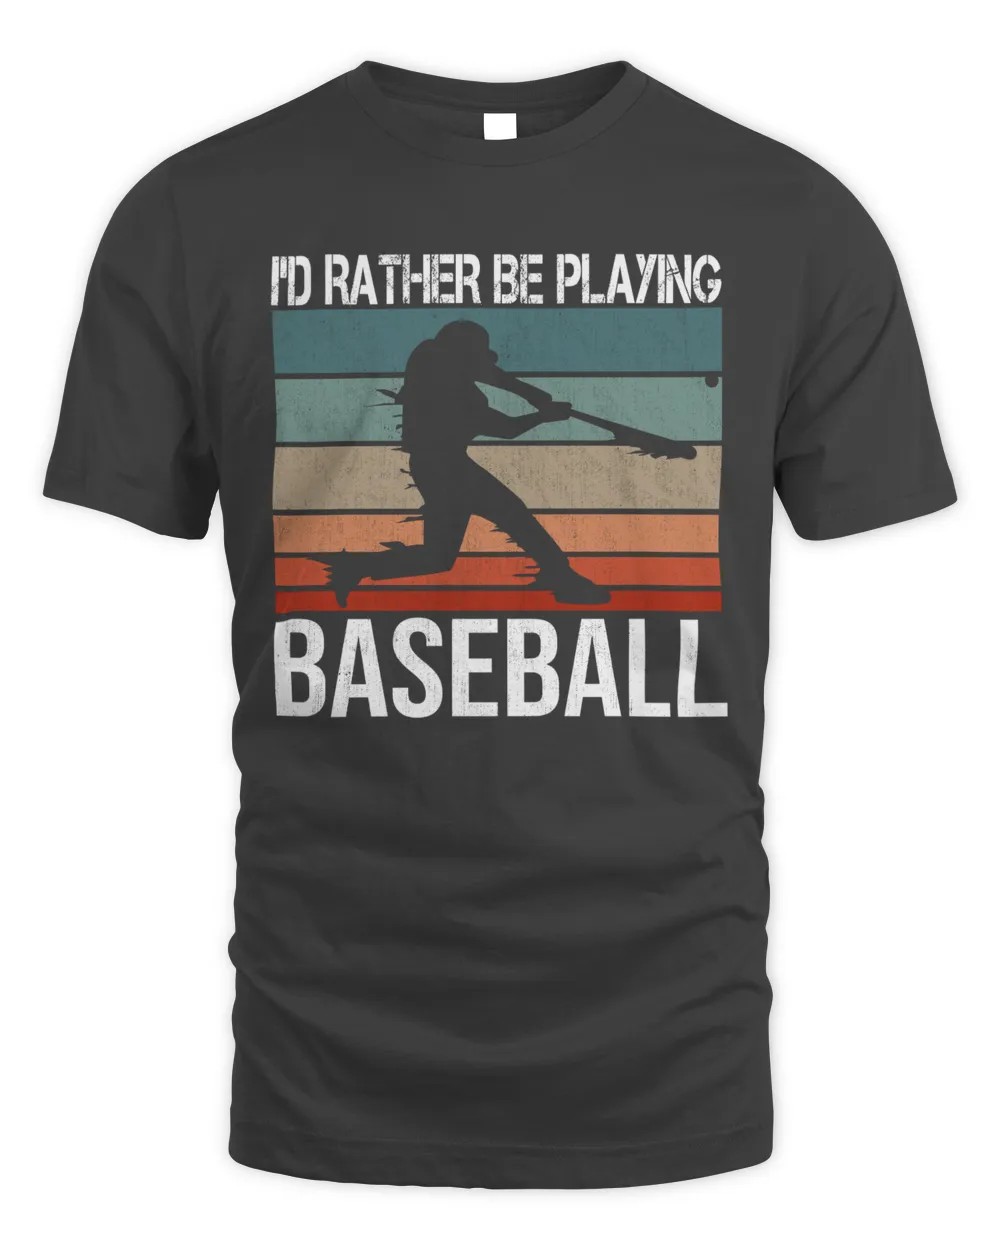 I'd rather be playing baseball